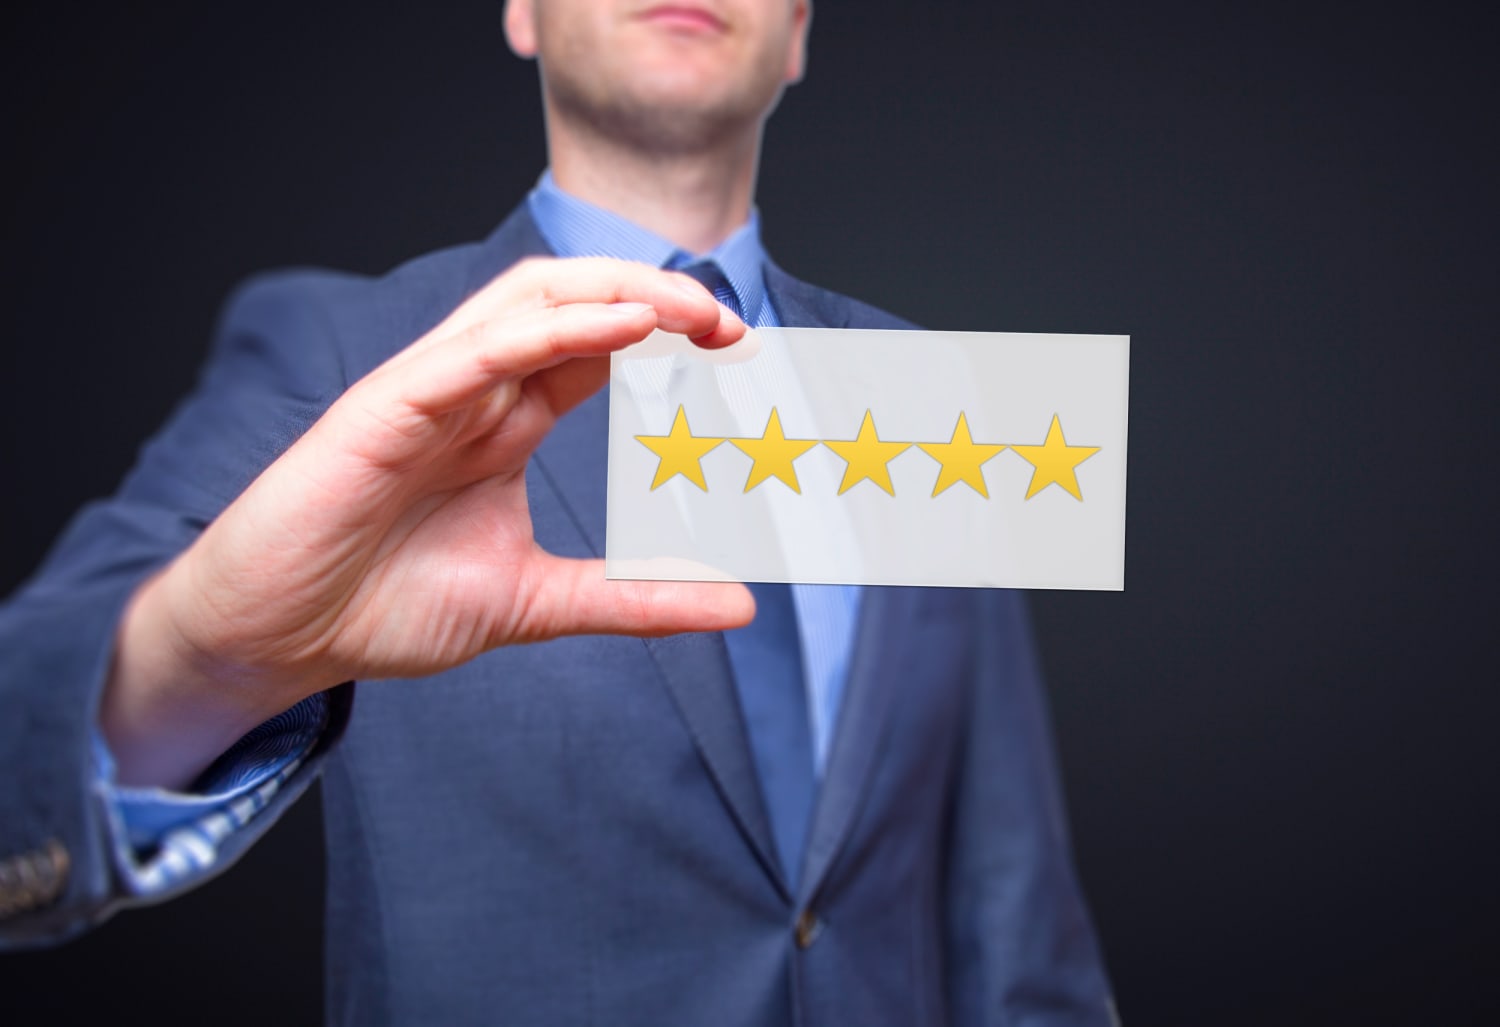 Online reviews: Here's what's behind all those star ratings